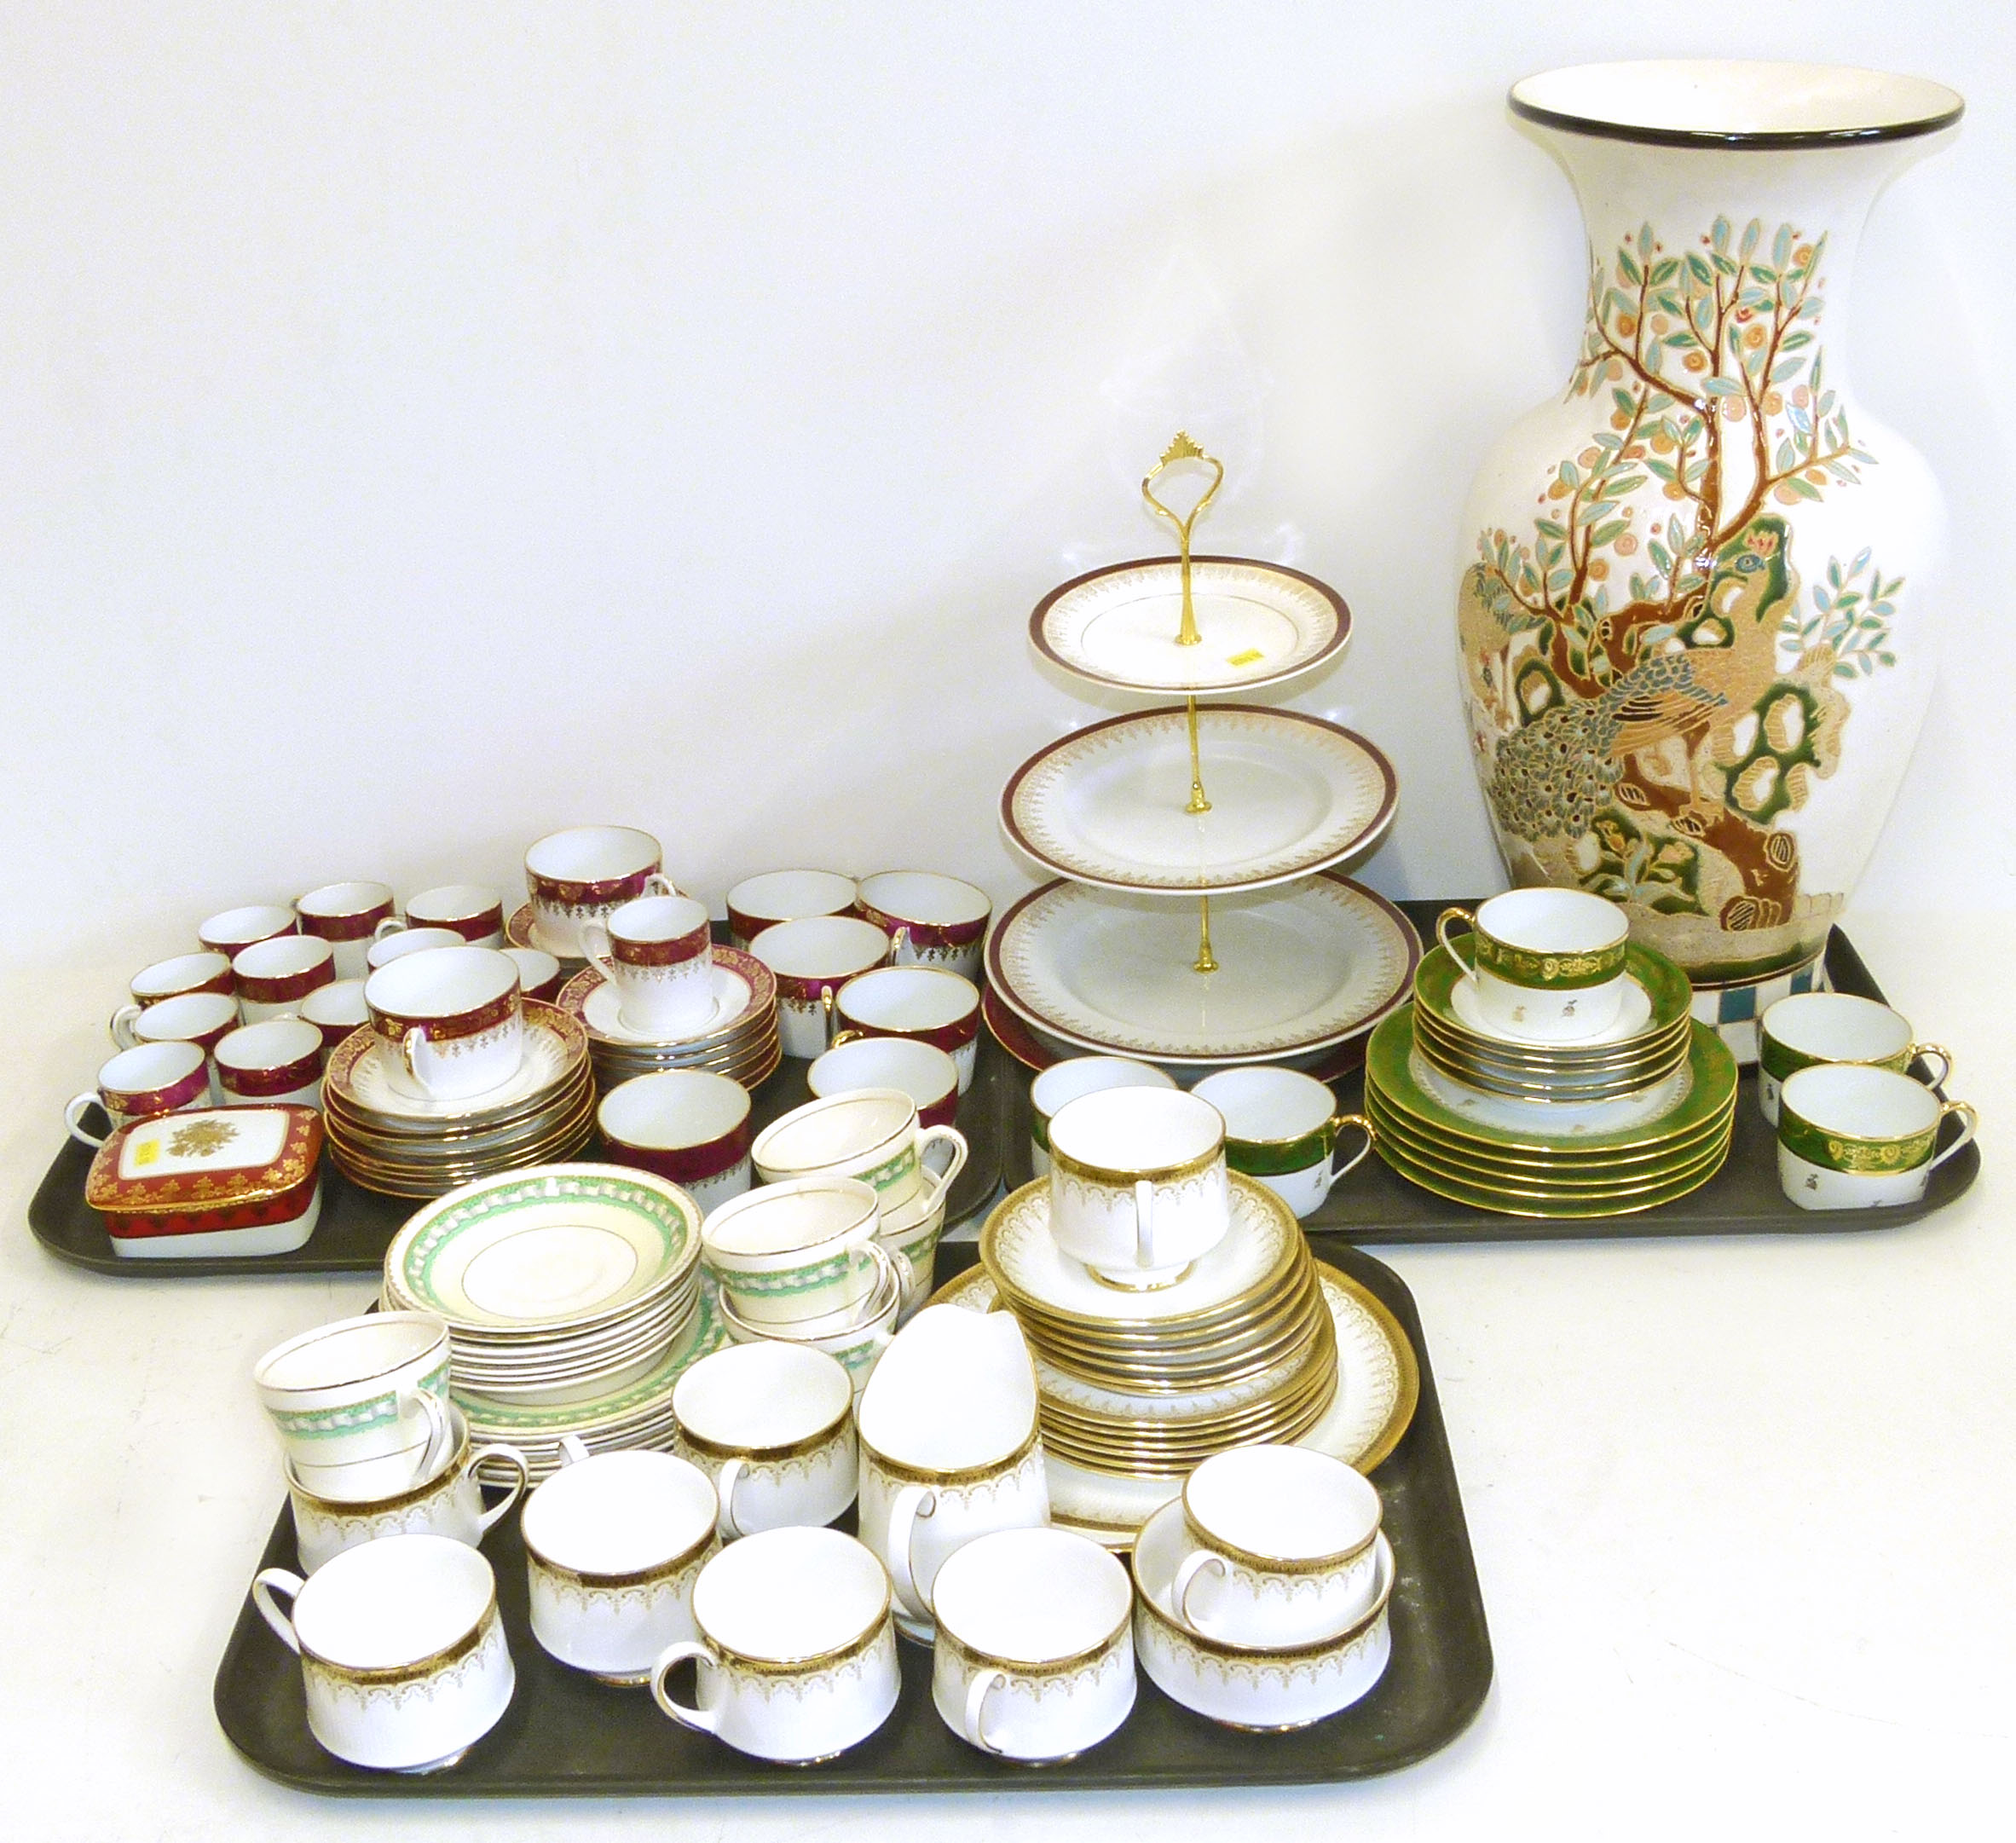 Quantity of Paragon "Athena", Portland pottery, Limoges and Meakin ware and large oriental style